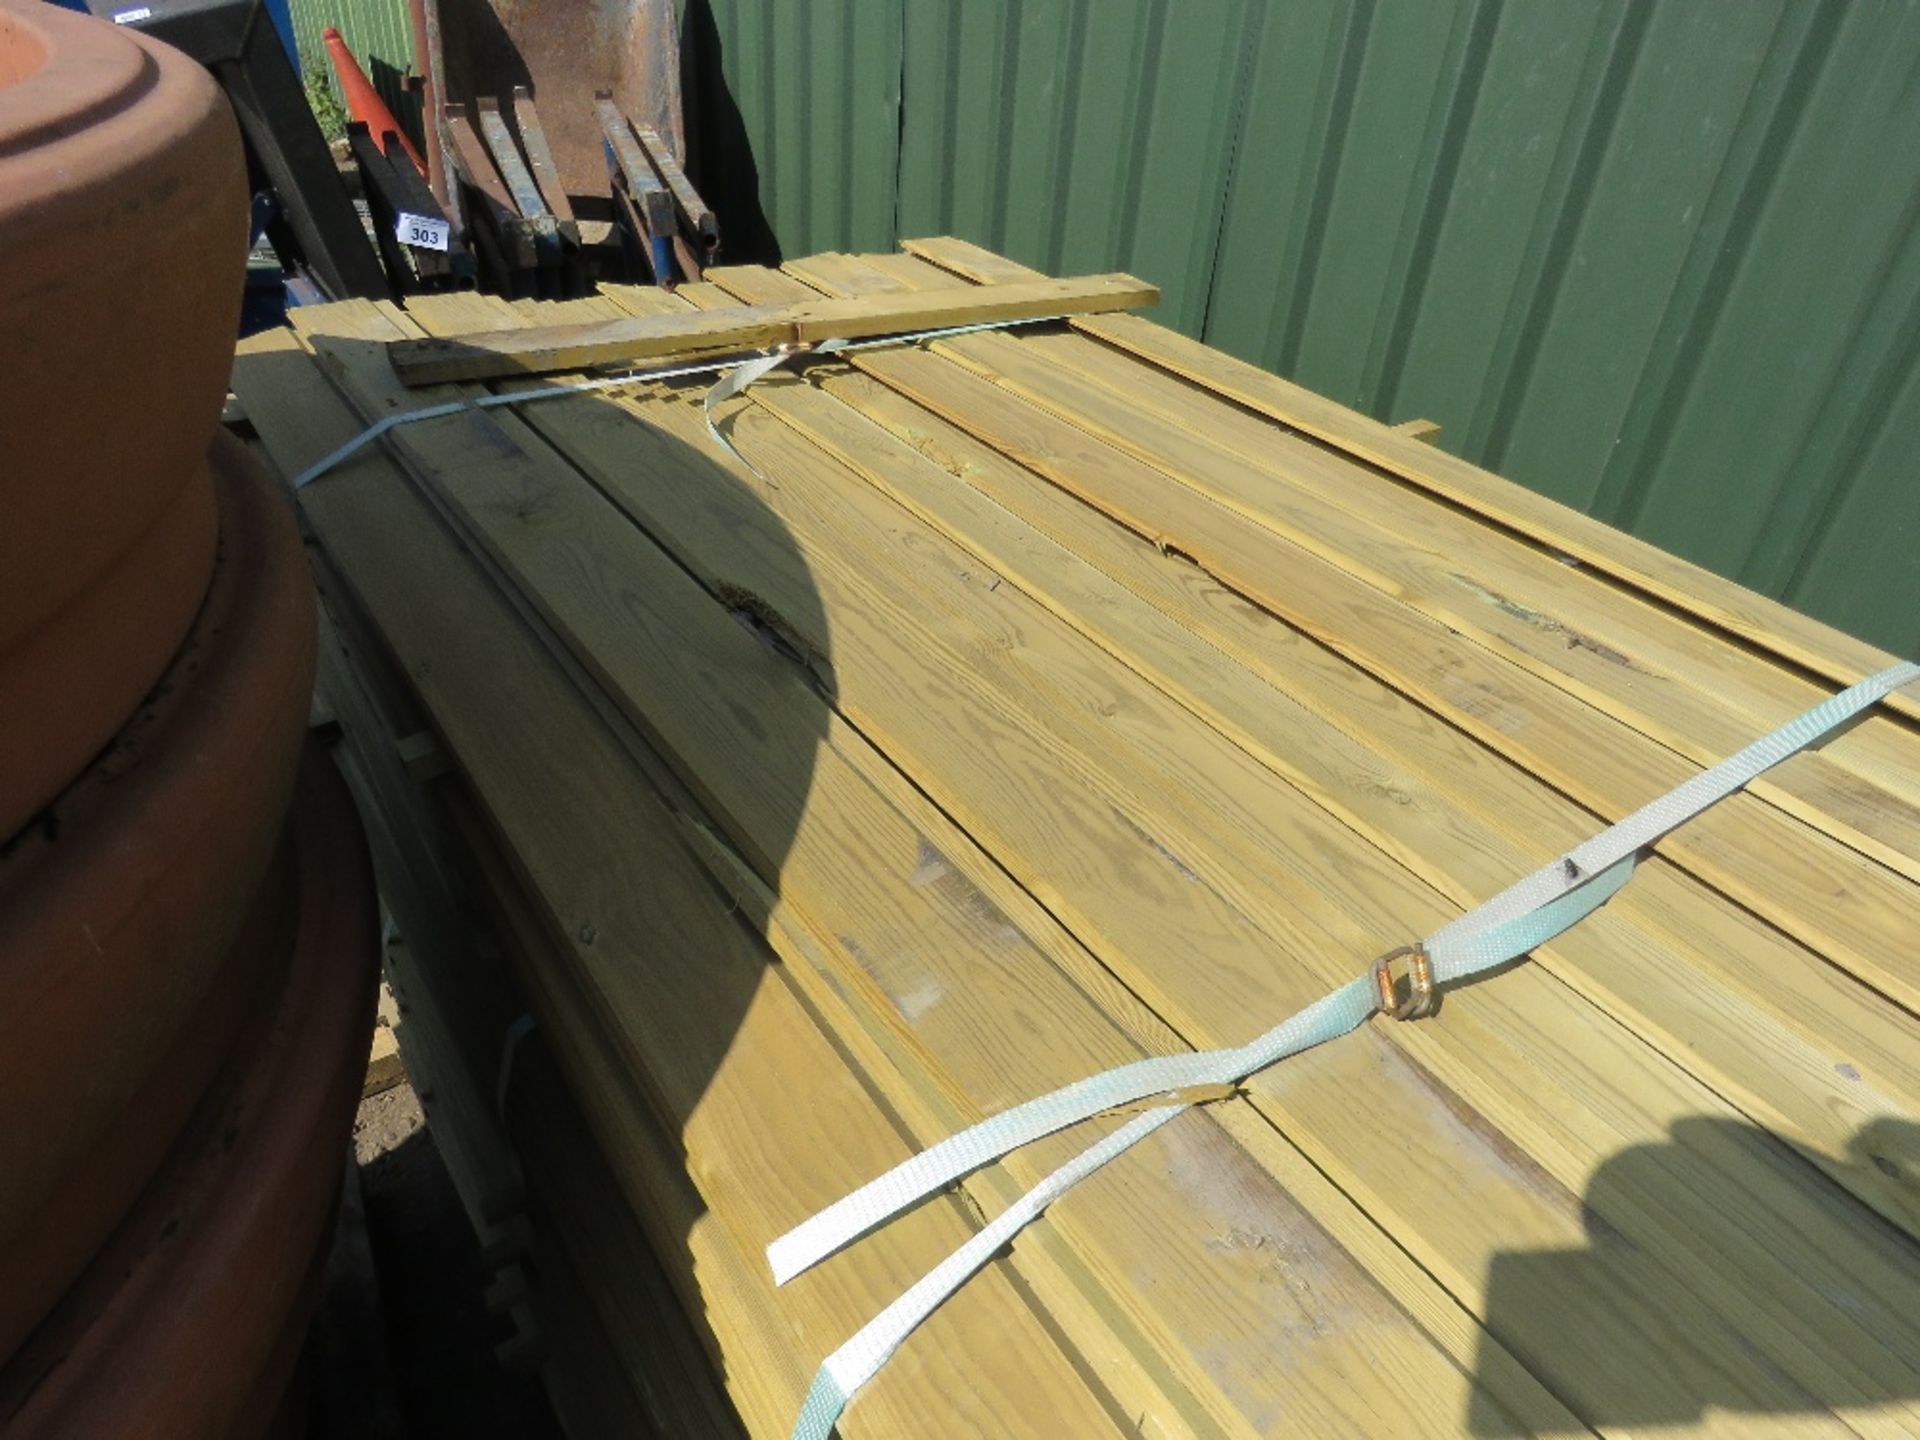 PACK OF PRESSURE TREATED SHIPLAP TIMBER FENCE CLADDING BOARDS, 1.73M LENGTH X 9.5CM WIDTH APPROX. - Image 3 of 3